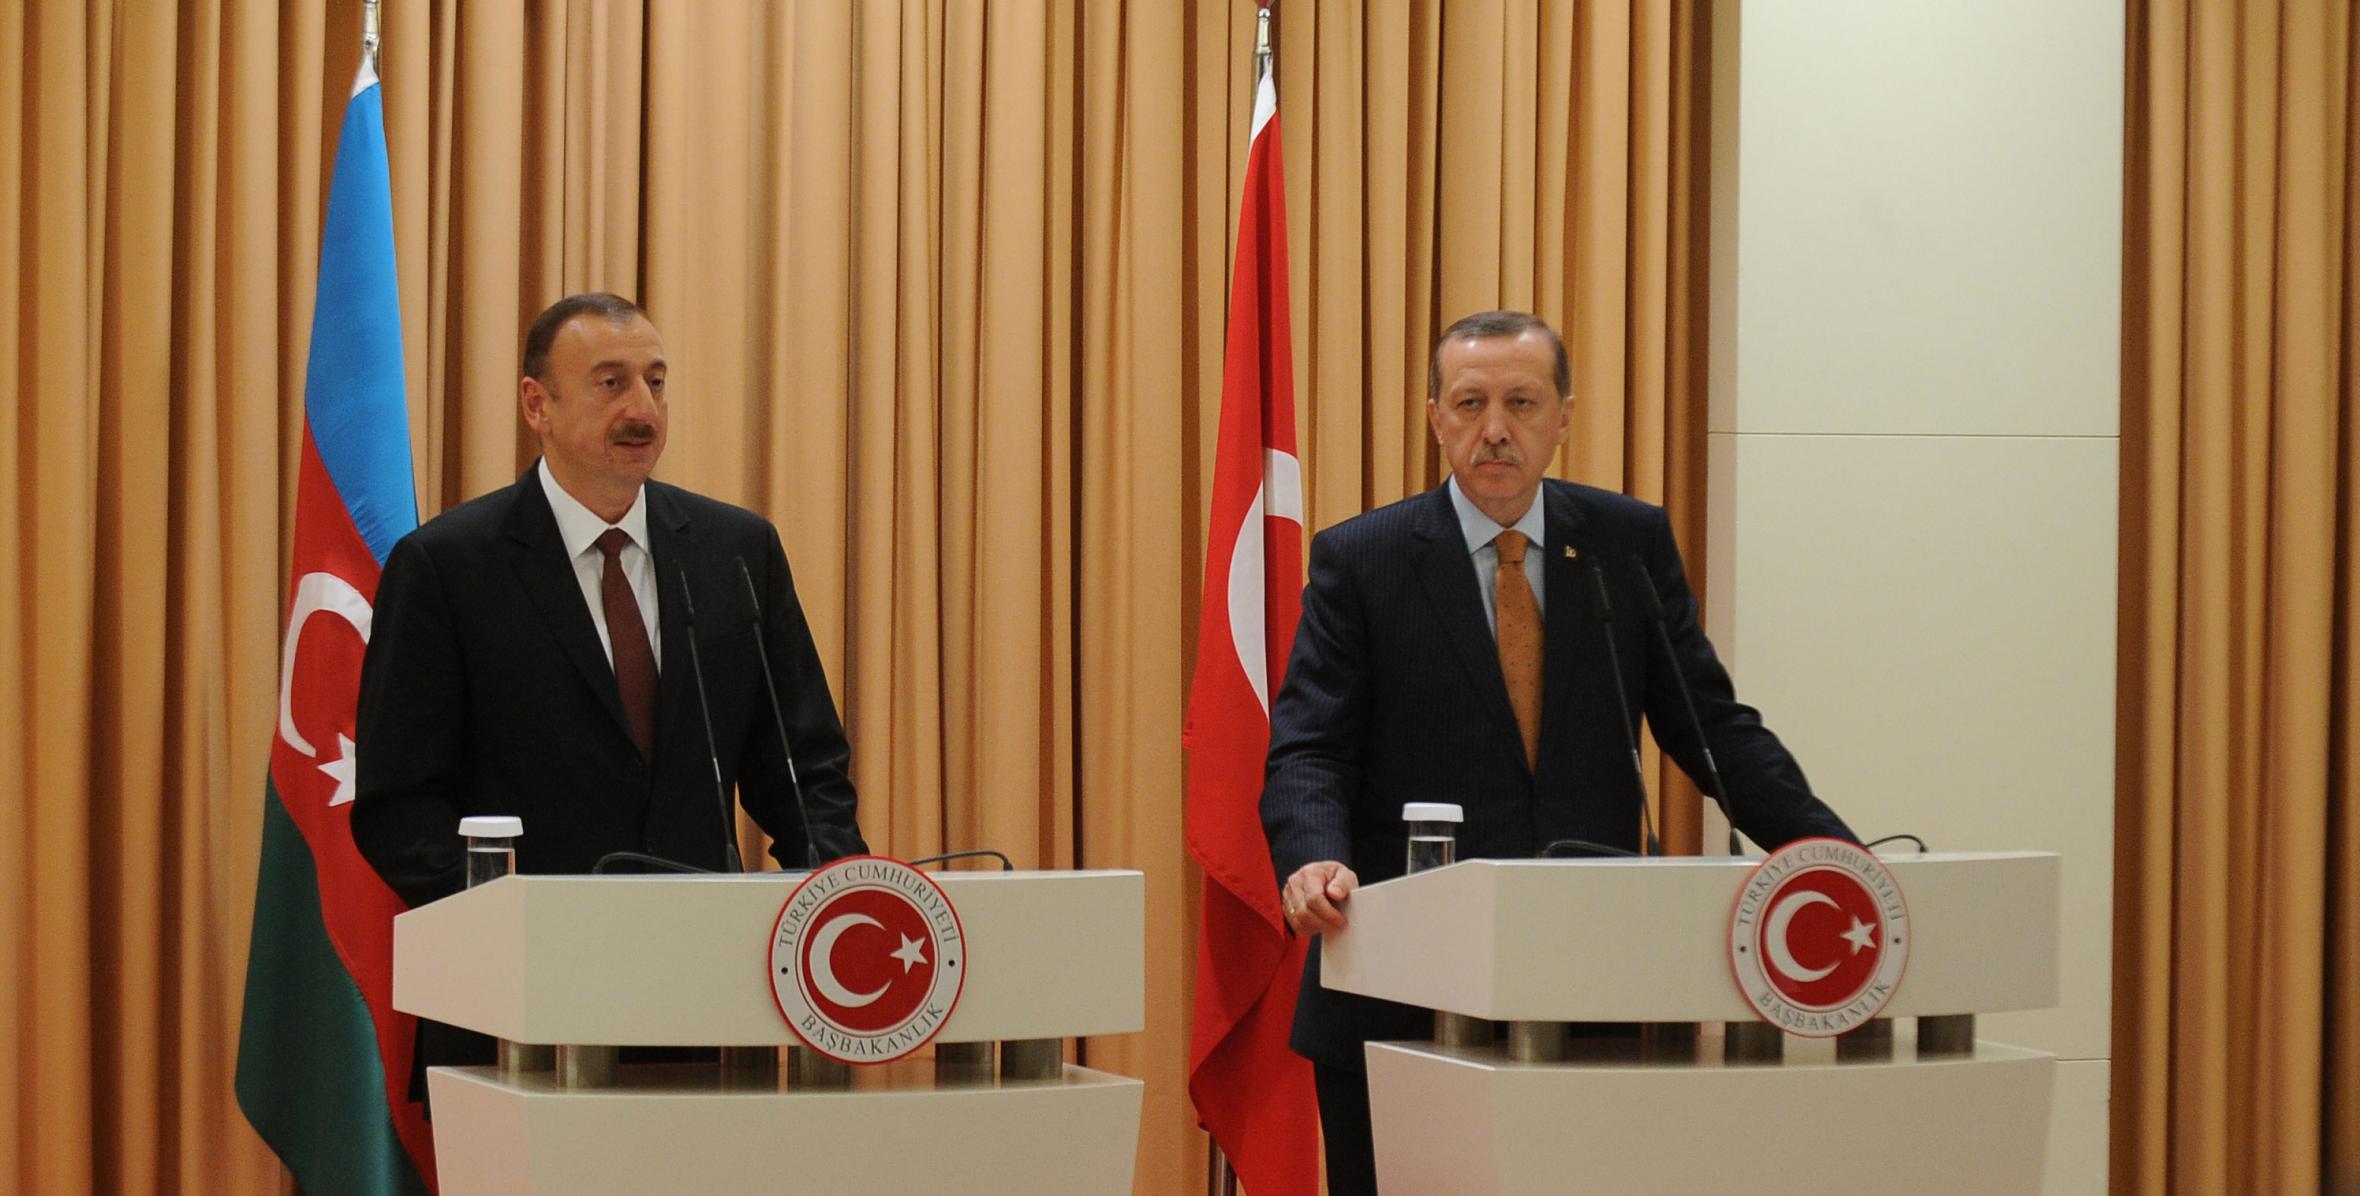 Ilham Aliyev and Turkish Prime Minister Recep Tayyip Erdogan held a joint press conference